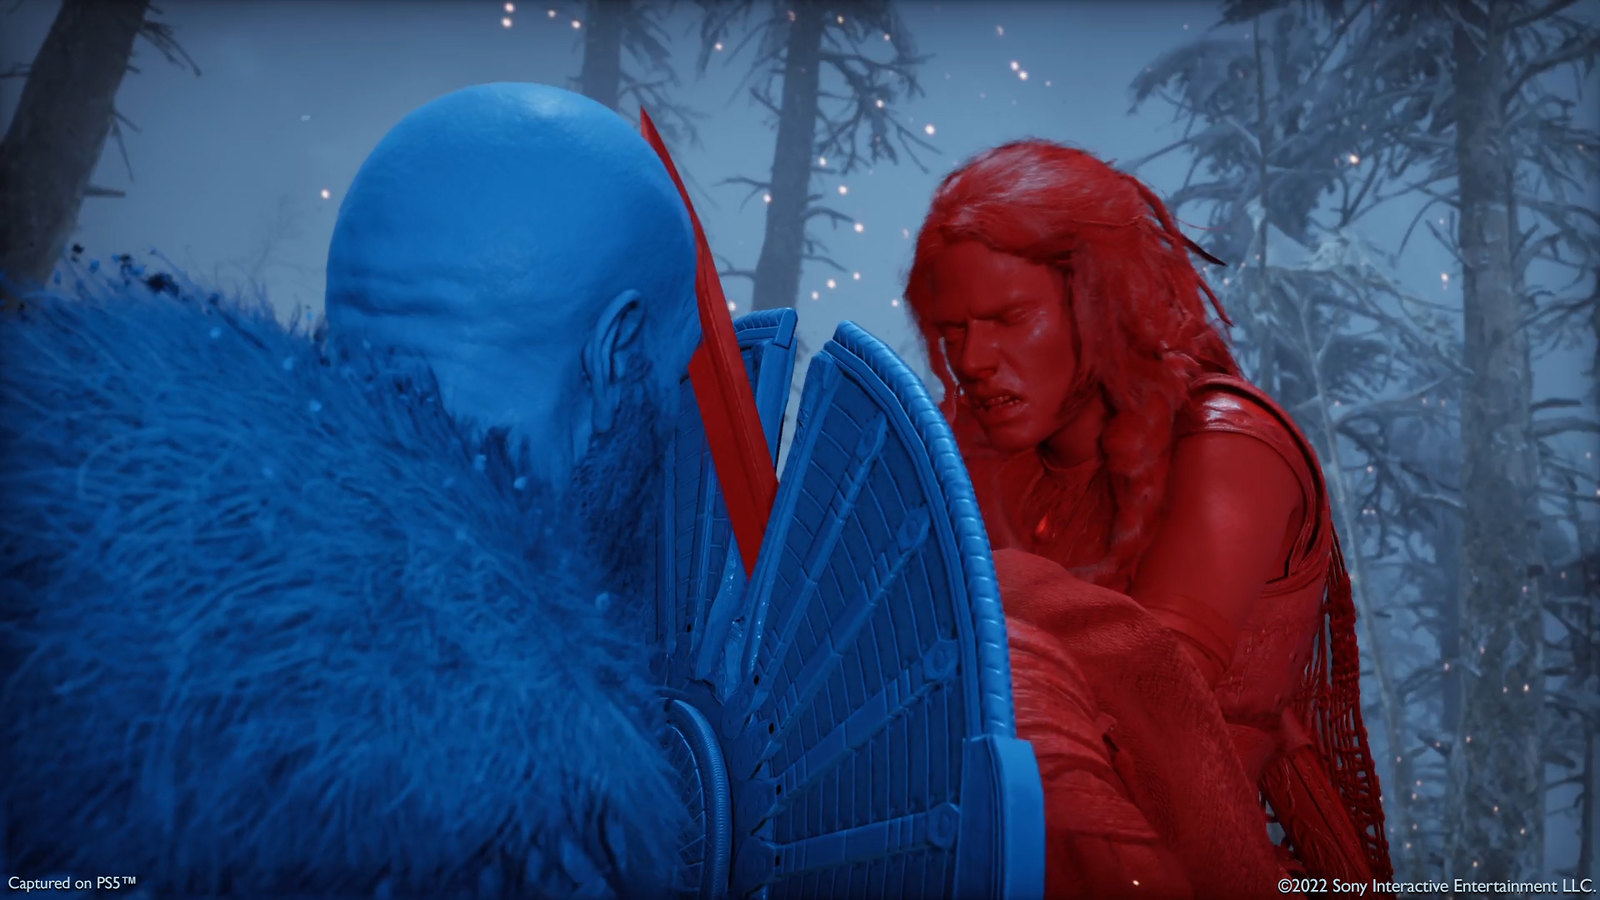 Kratos blocks the sword of Frigg in a screenshot from God of War Ragnarok using its high-contrast color mode. In the image, Kratos is overlayed with a blue color, while Frigg is overlayed in red.